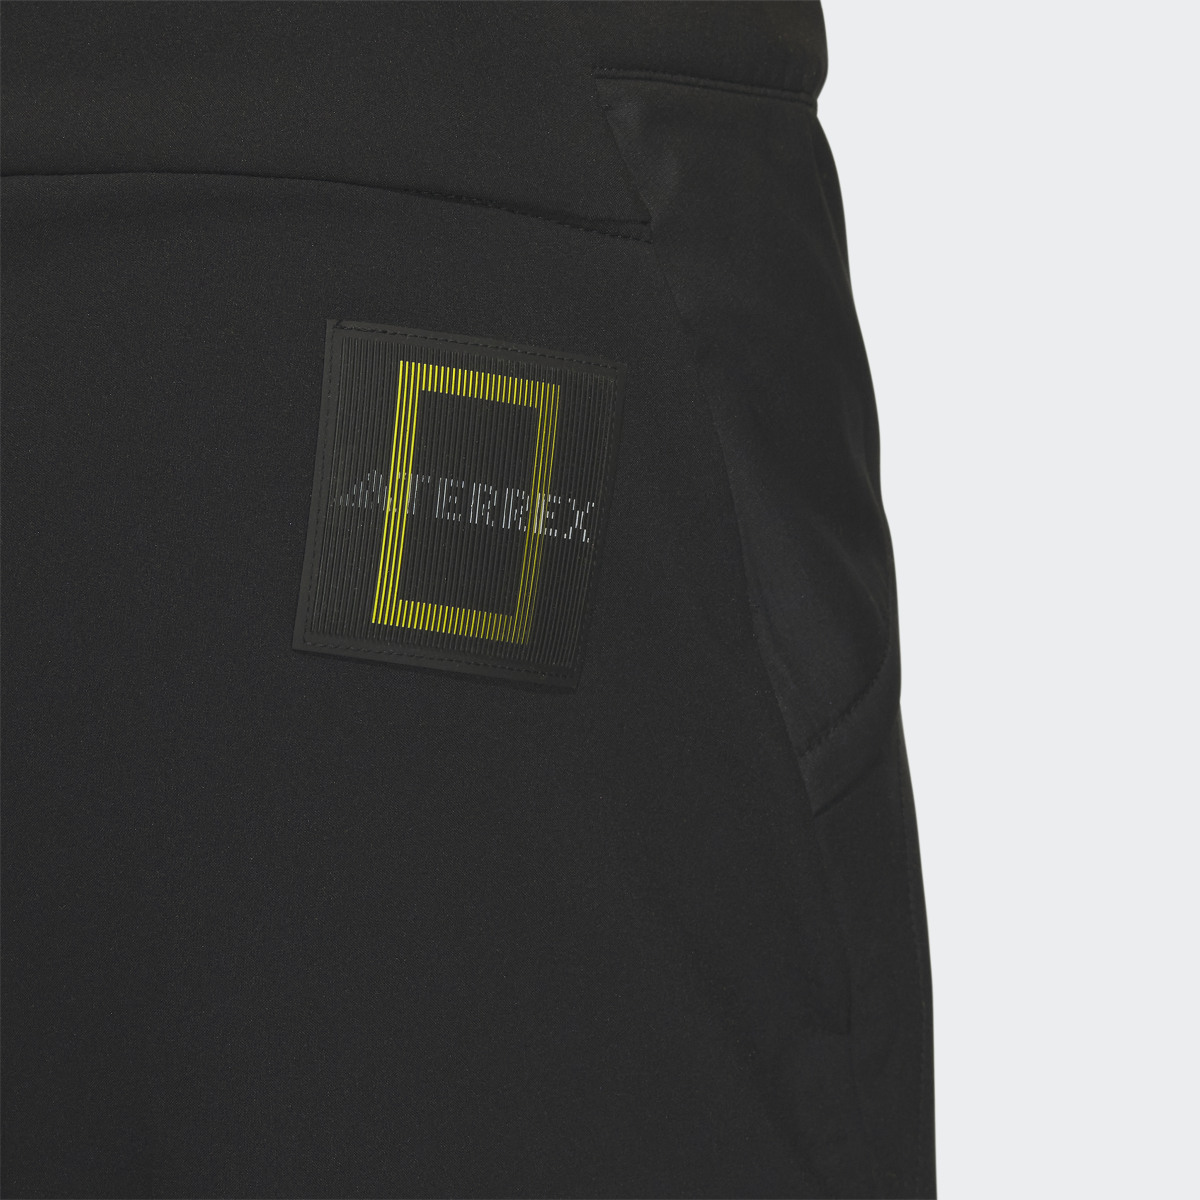 Adidas National Geographic Soft Shell Trousers. 6